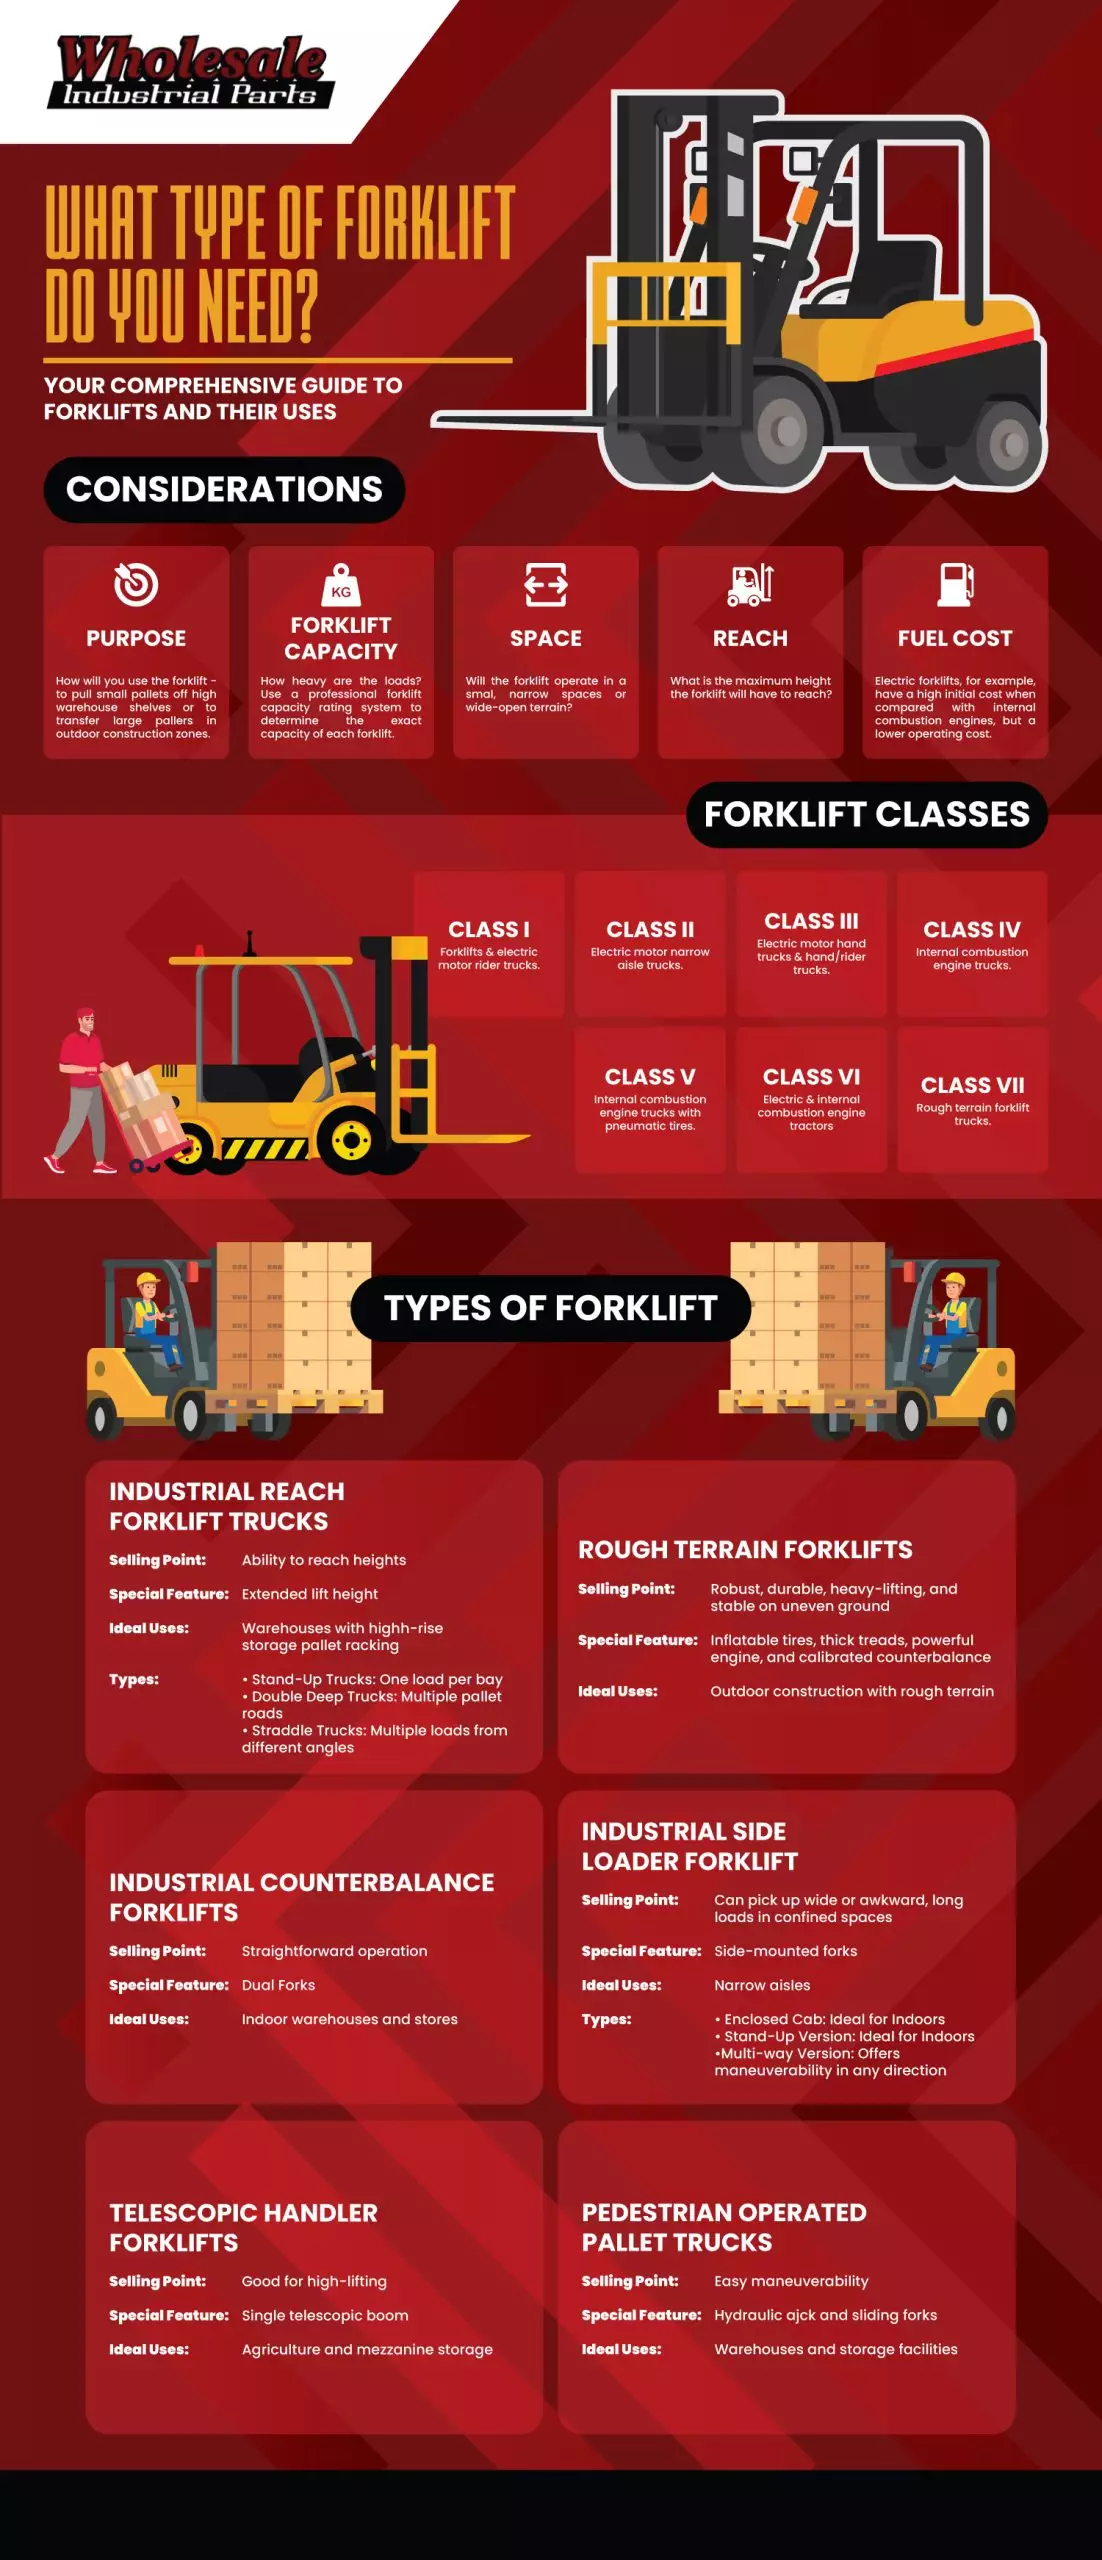 A Definitive Guide to Forklift Classes